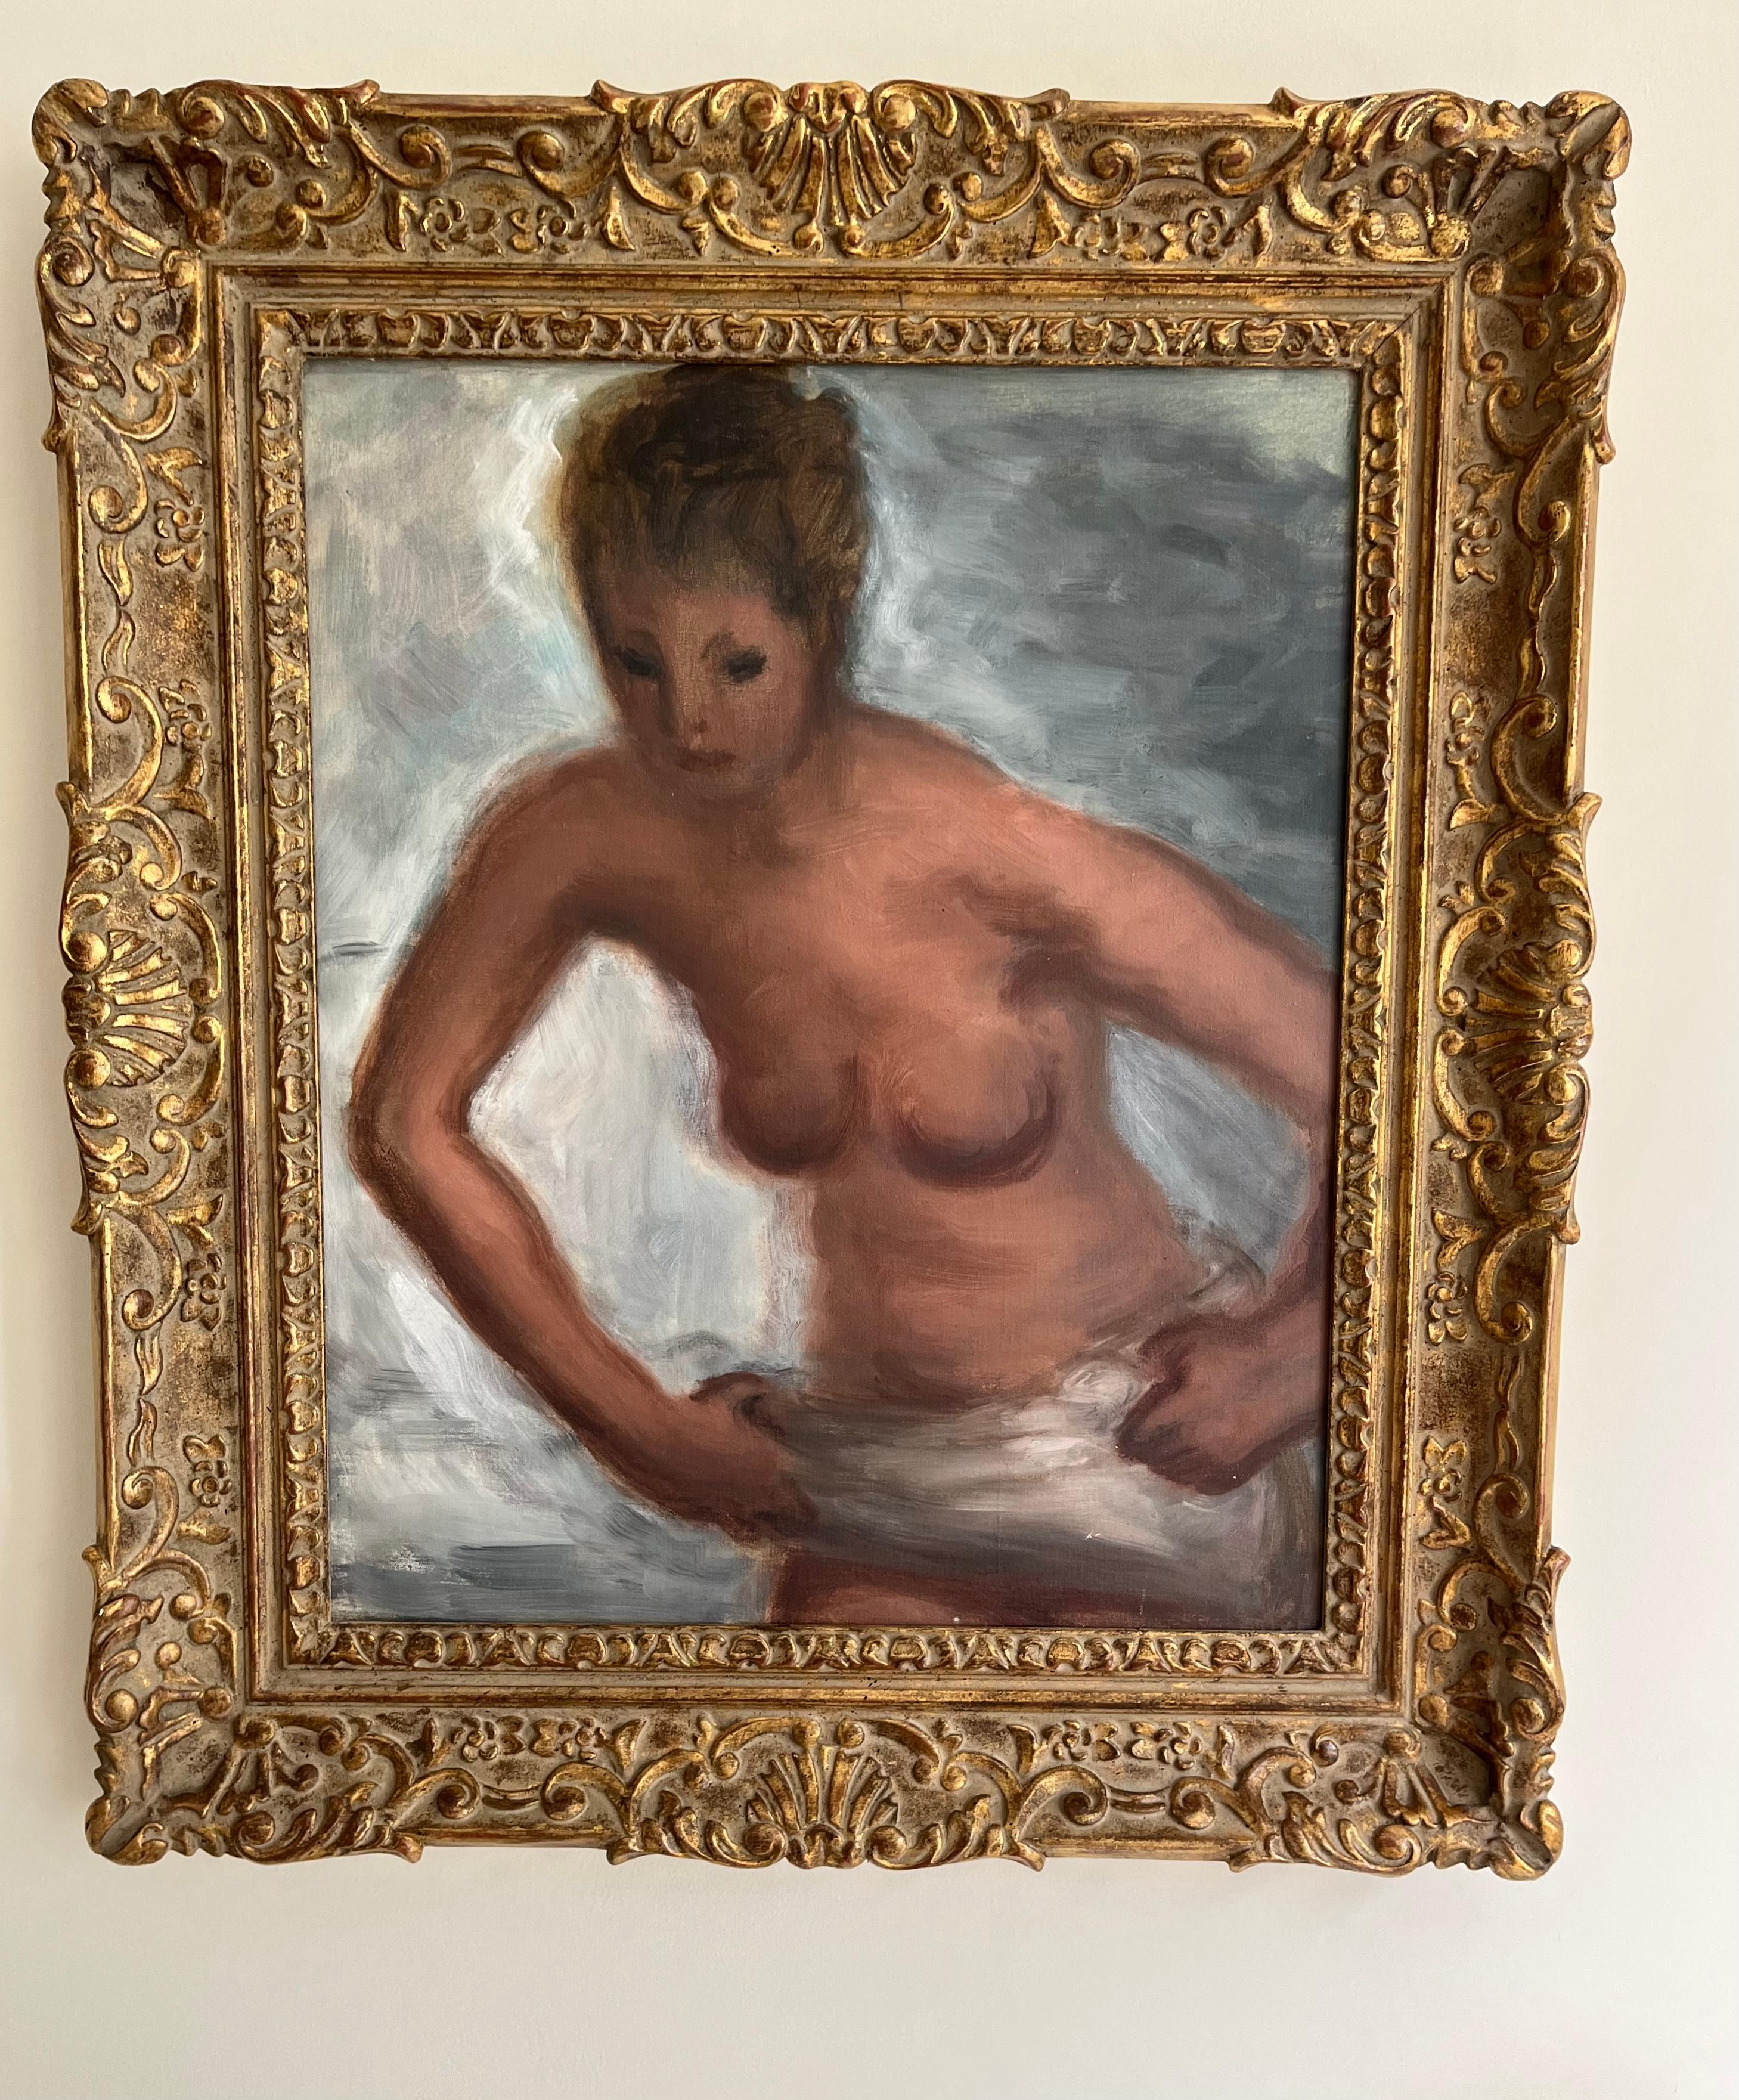 A beautiful nude painting by the British artist Elsie Farleigh signed and dated verso 1934. 
Elsie Farleigh 1900-1981 studied under Bernard Meninsky and James Grant. Exhibited with Redfern and Leicester galleries. 